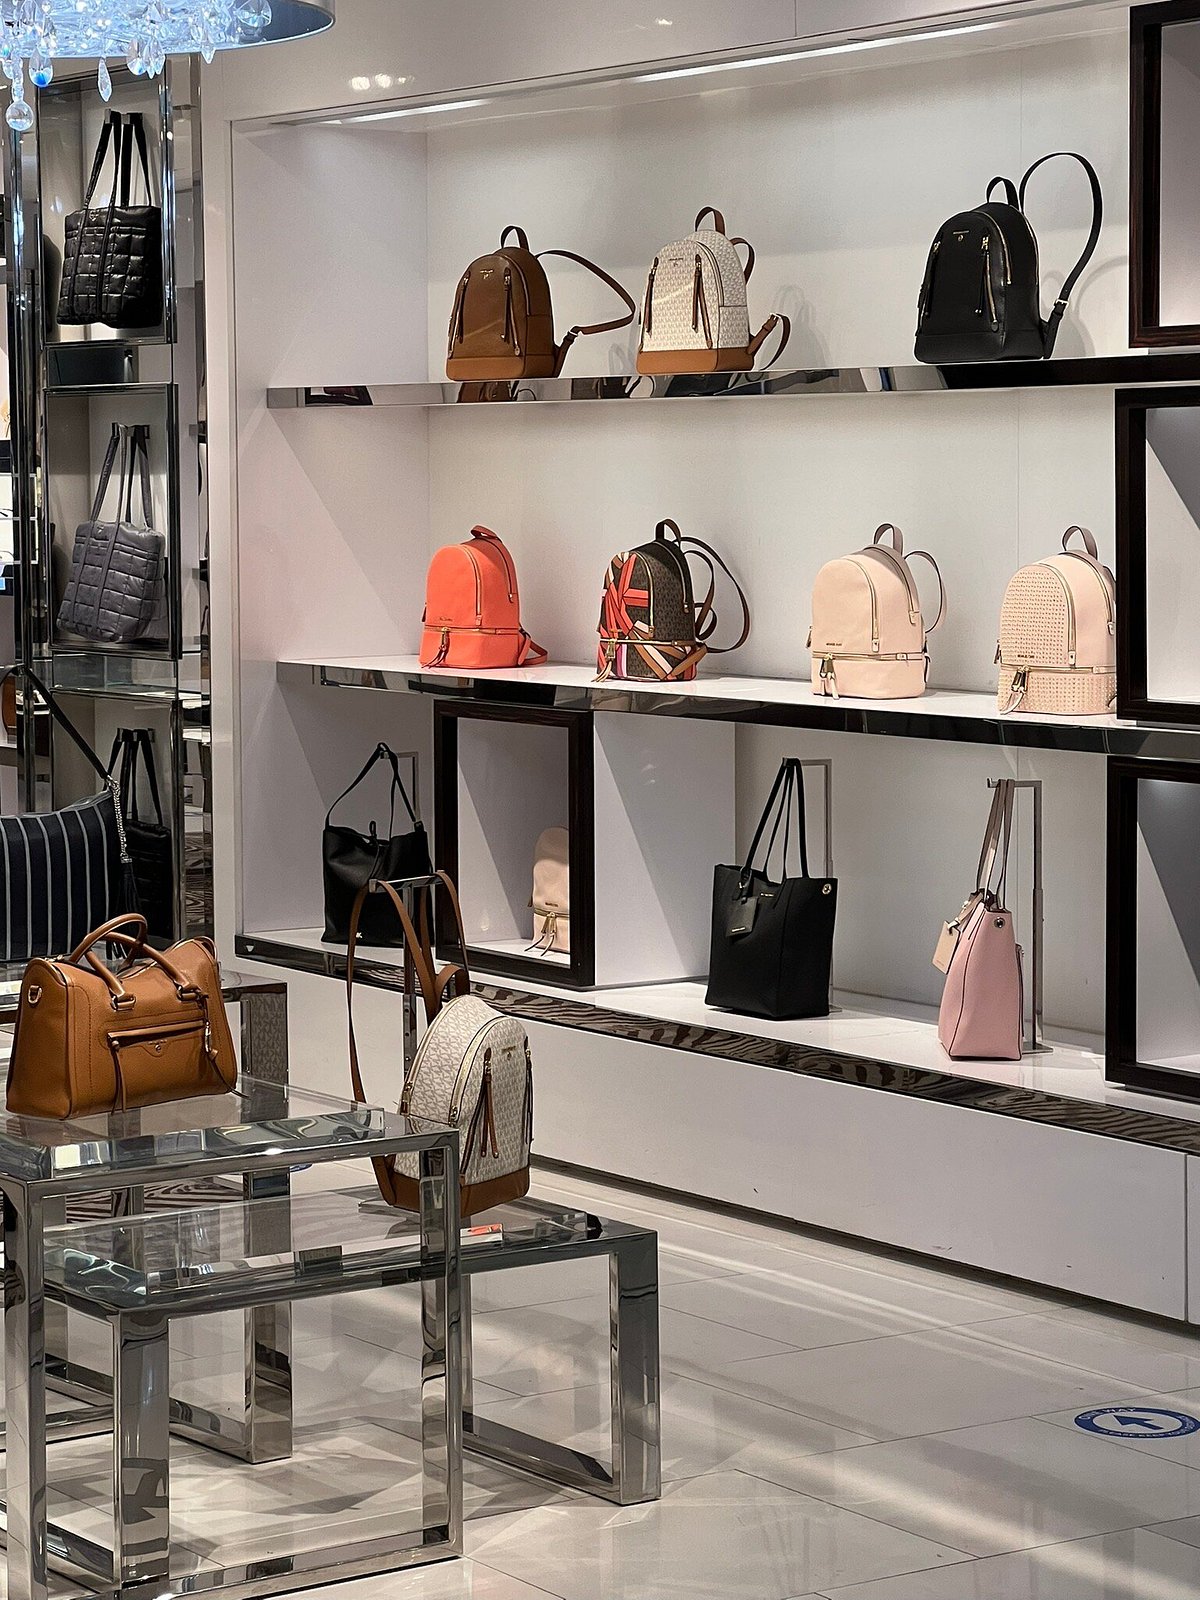 Michael Kors Lifestyle store debuts at Venice Marco Polo Airport